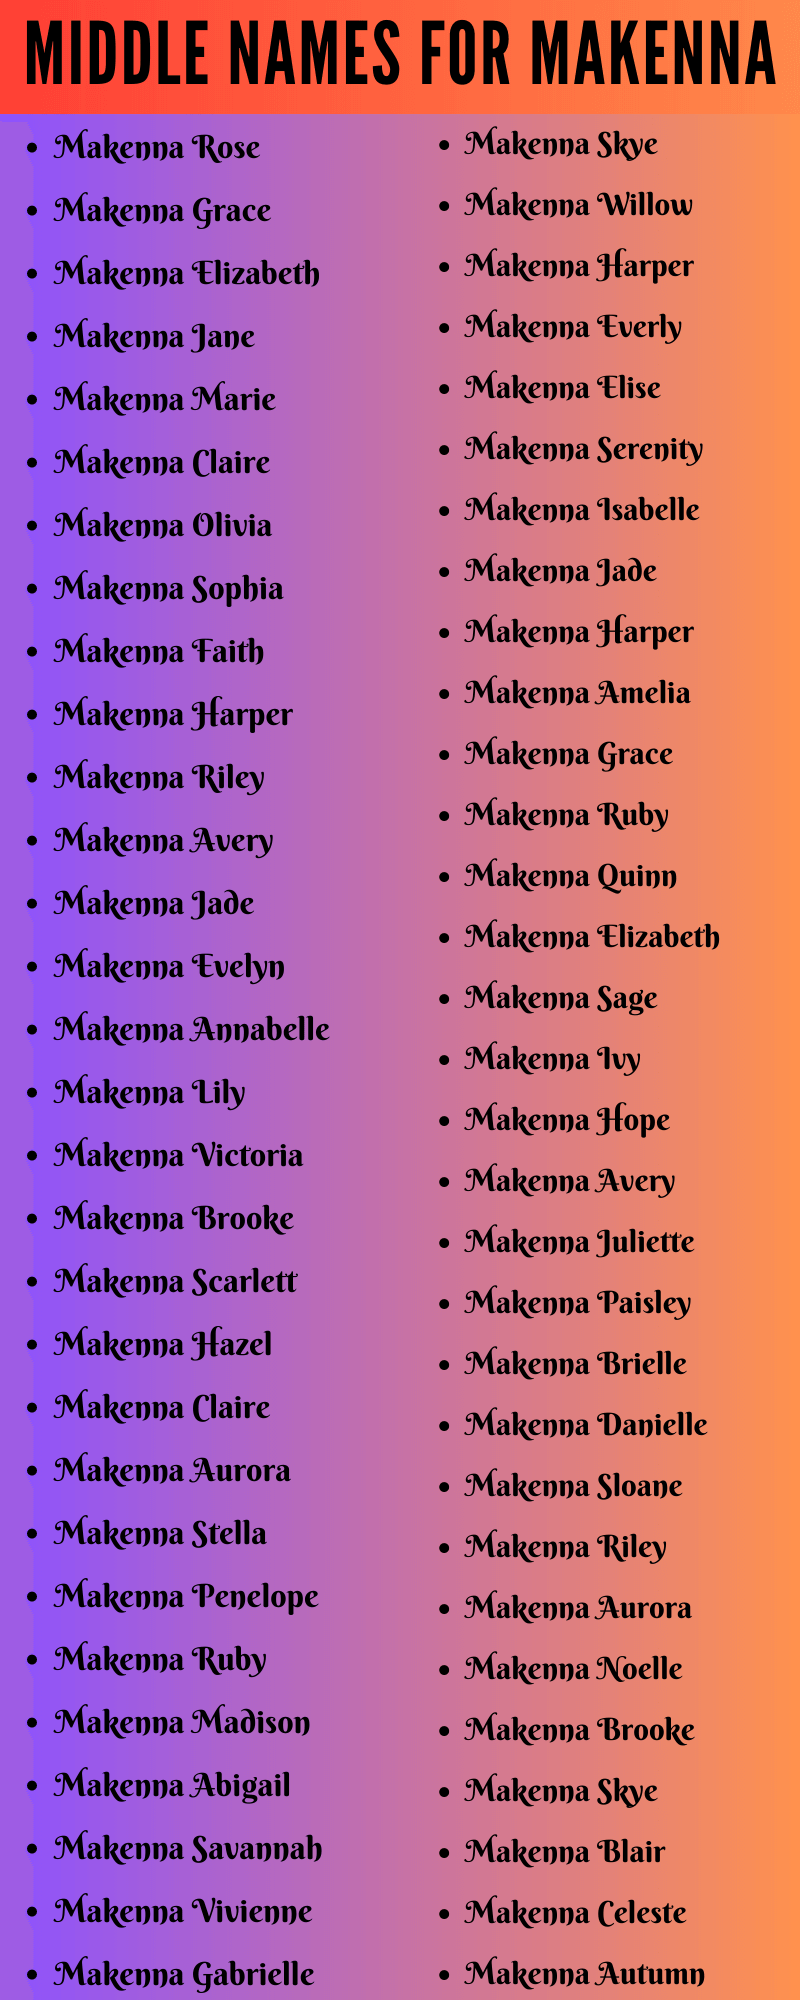 400 Unique Middle Names For Makenna